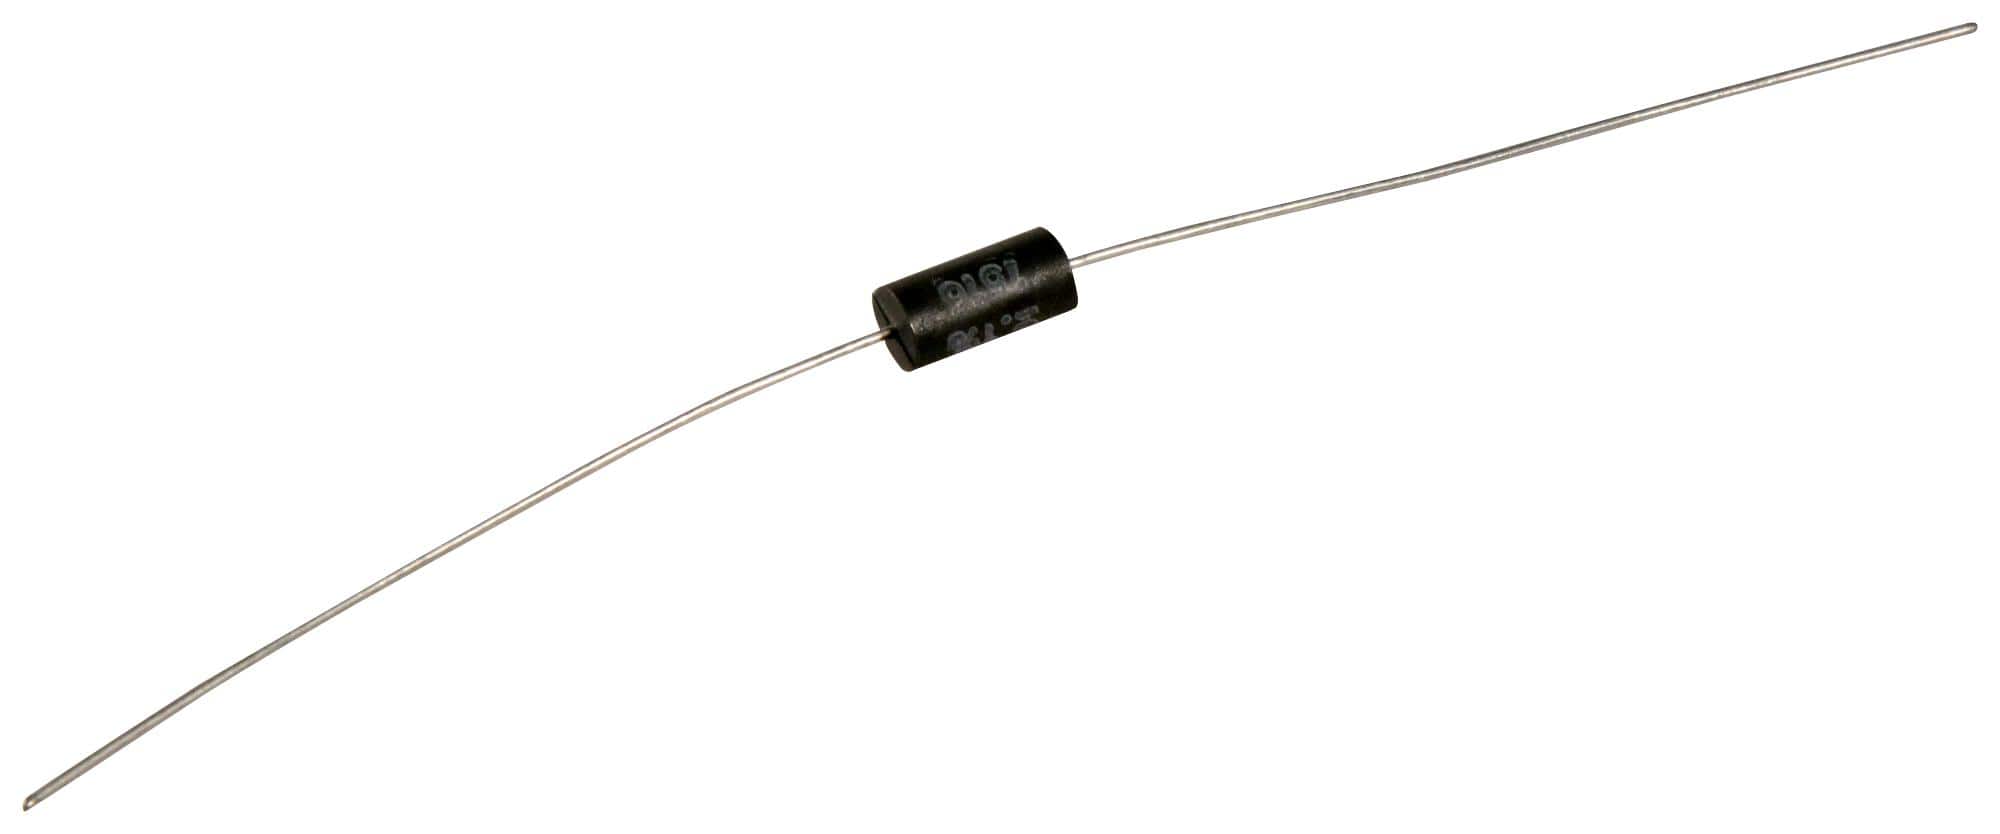 UPW25B50RV RES, 50R, 0.10%, 250MW, AXIAL, WIREWOUND NEOHM - TE CONNECTIVITY